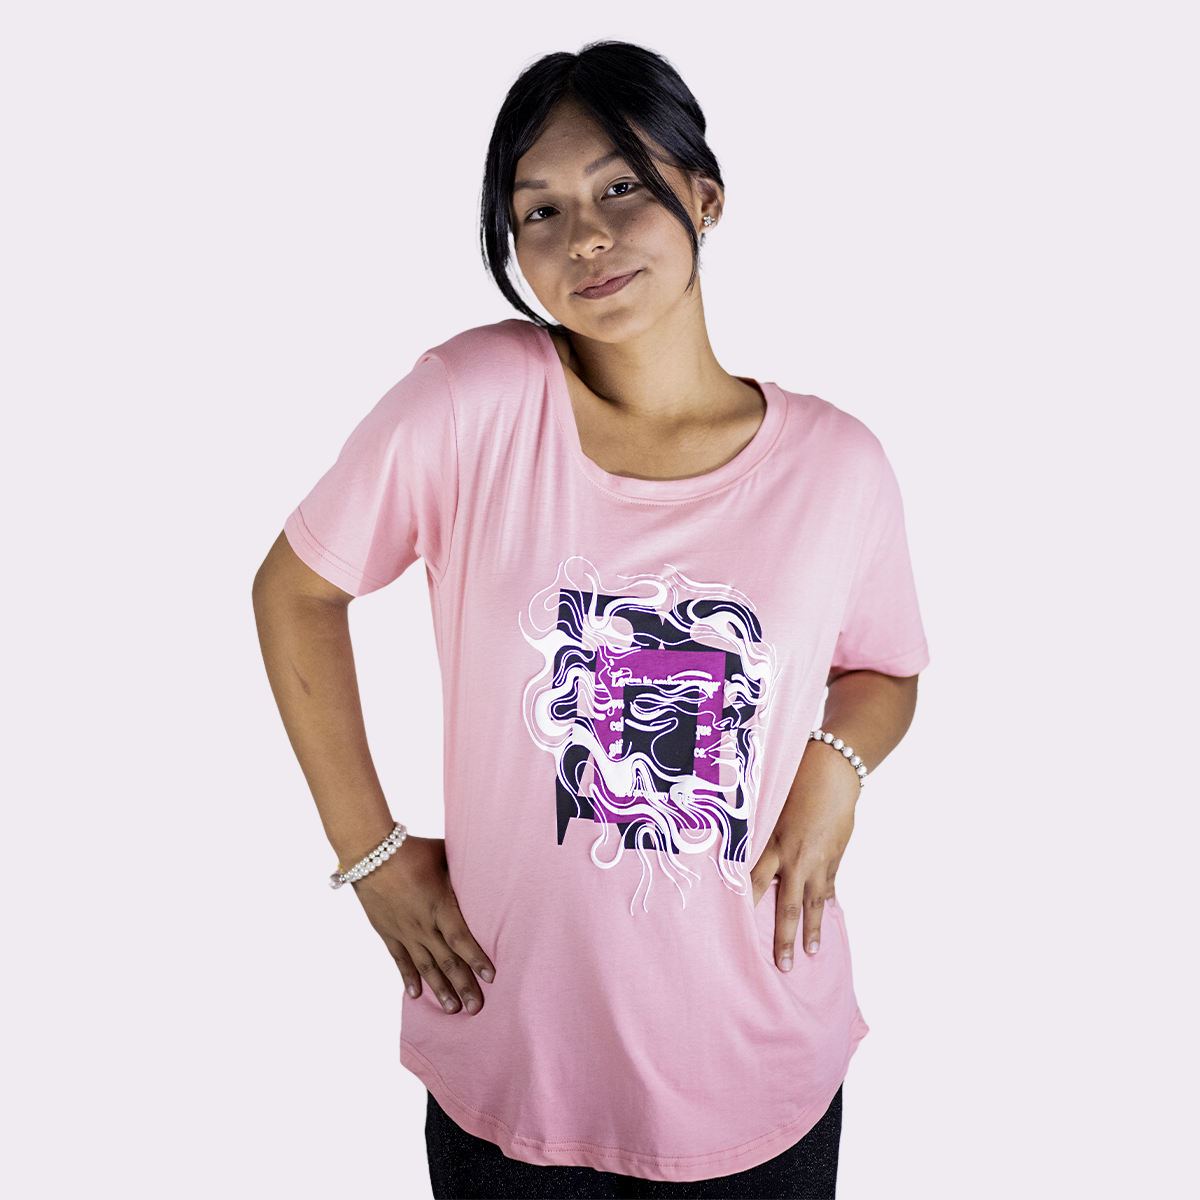 Graphic Tee with UNIQUE BEAUTY Design Stand Out in Style for women's